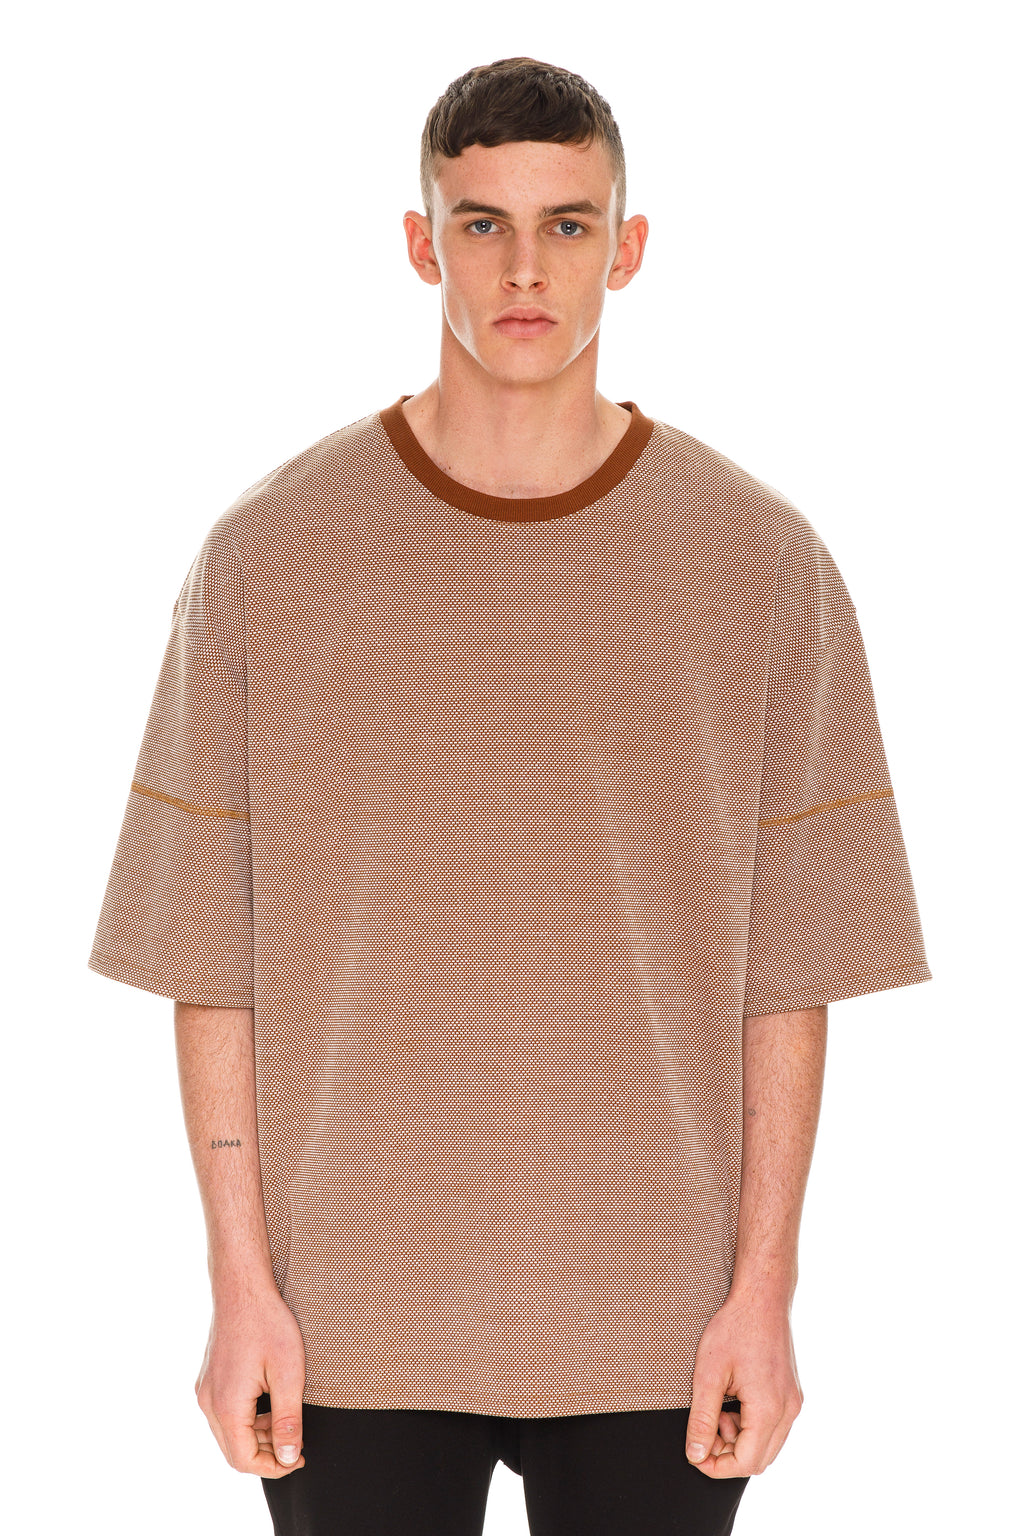 Rare Designed Dark Brown Oversized Short Sleeve With Dropped Shoulders- Front View